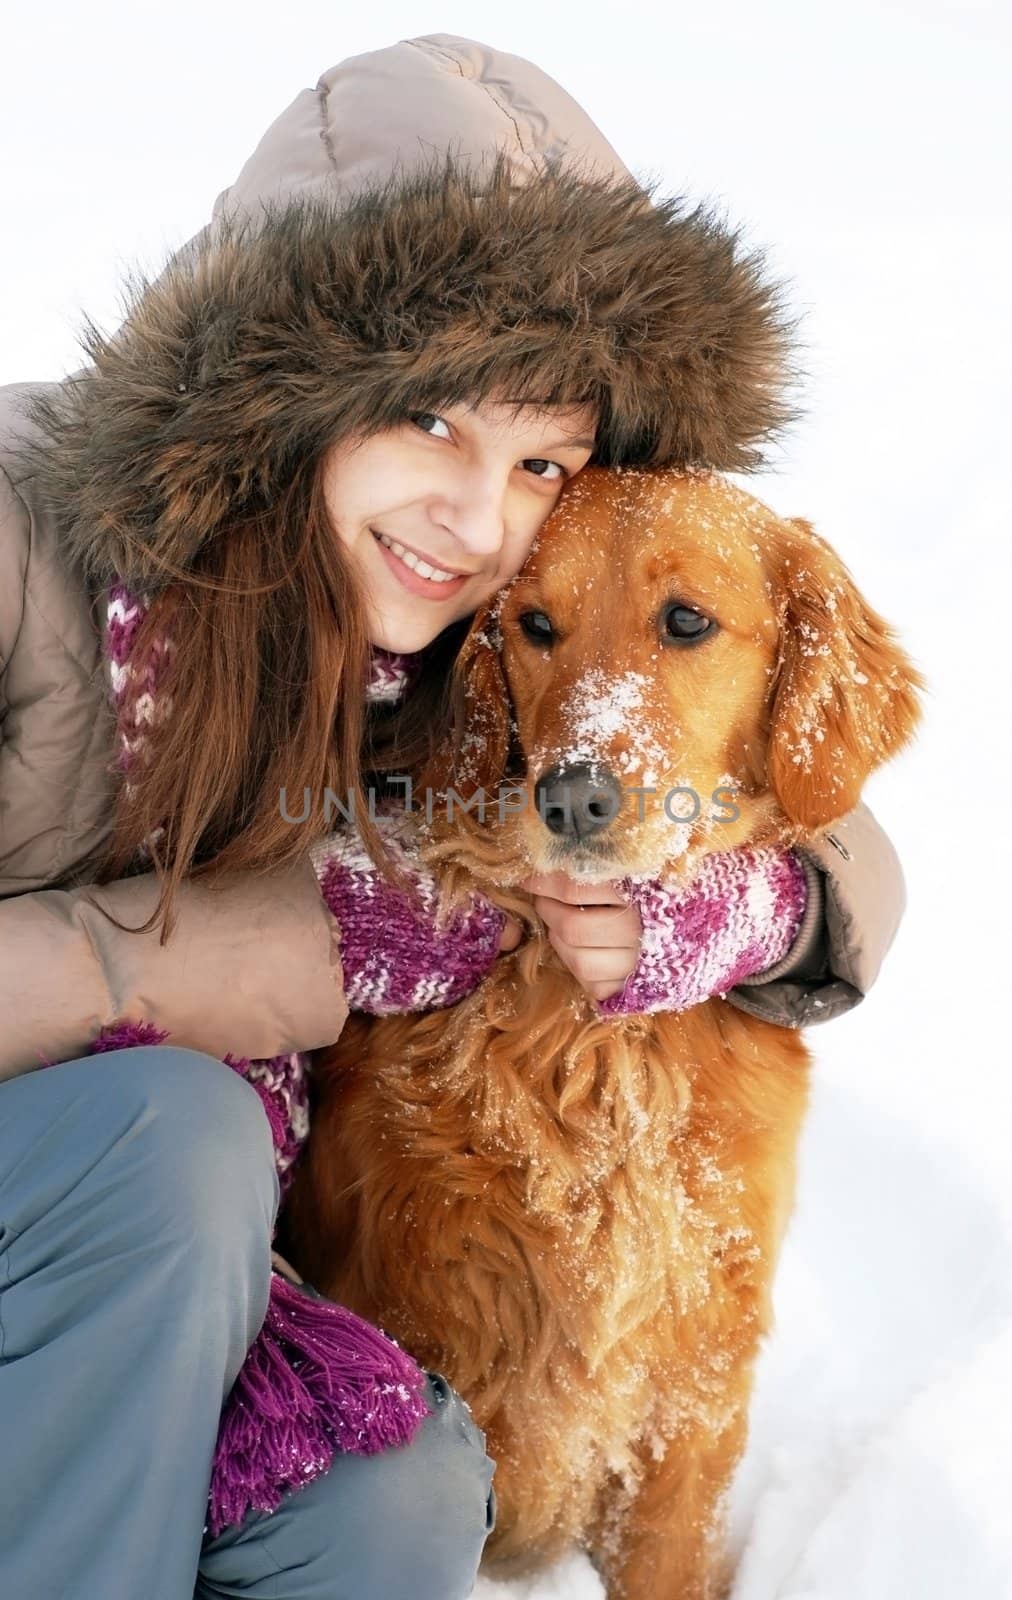 Smiling girl and her dog by simply